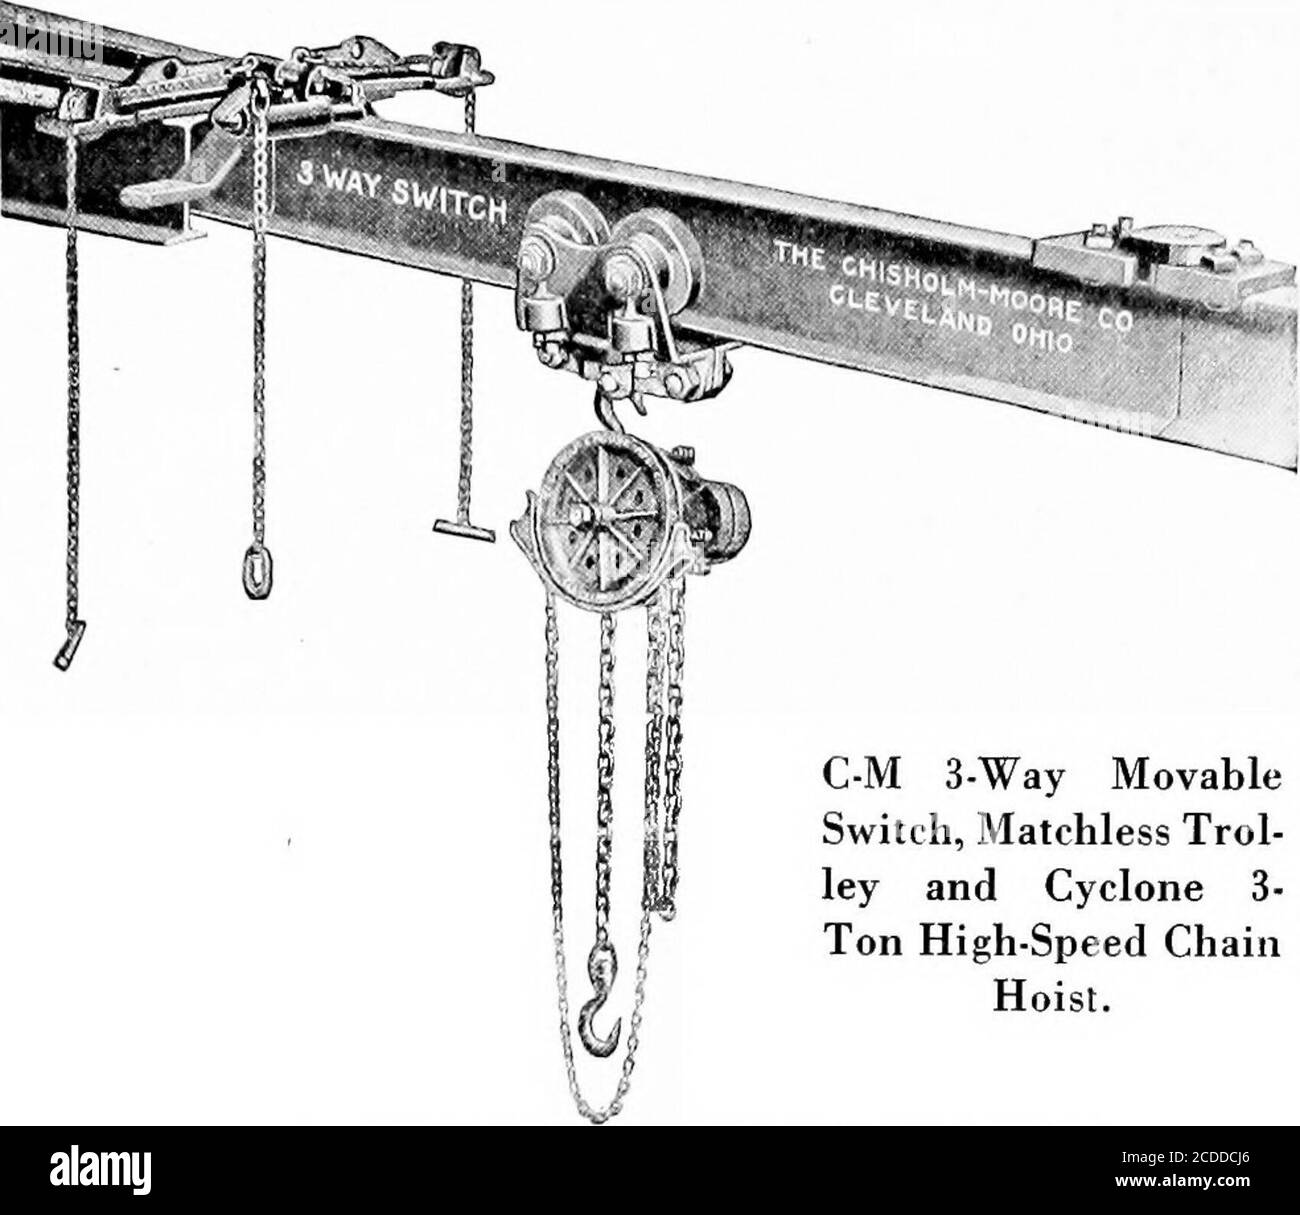 . Material handling cyclopedia; a reference book covering definitions, descriptions, illustrations and methods of use of material handling machines employed in industry . Reading Multiple Gear Hoists. READING CHAIN & BLOCK CORPORATION, READING, PA. 777 C-M HOISTS, TROLLEYS AND CRANES. C-M 3-Way MovableSwitch, Matchless Trol-ley and Cyclone 3-Ton High-Speed ChainHoist. Stock Photo